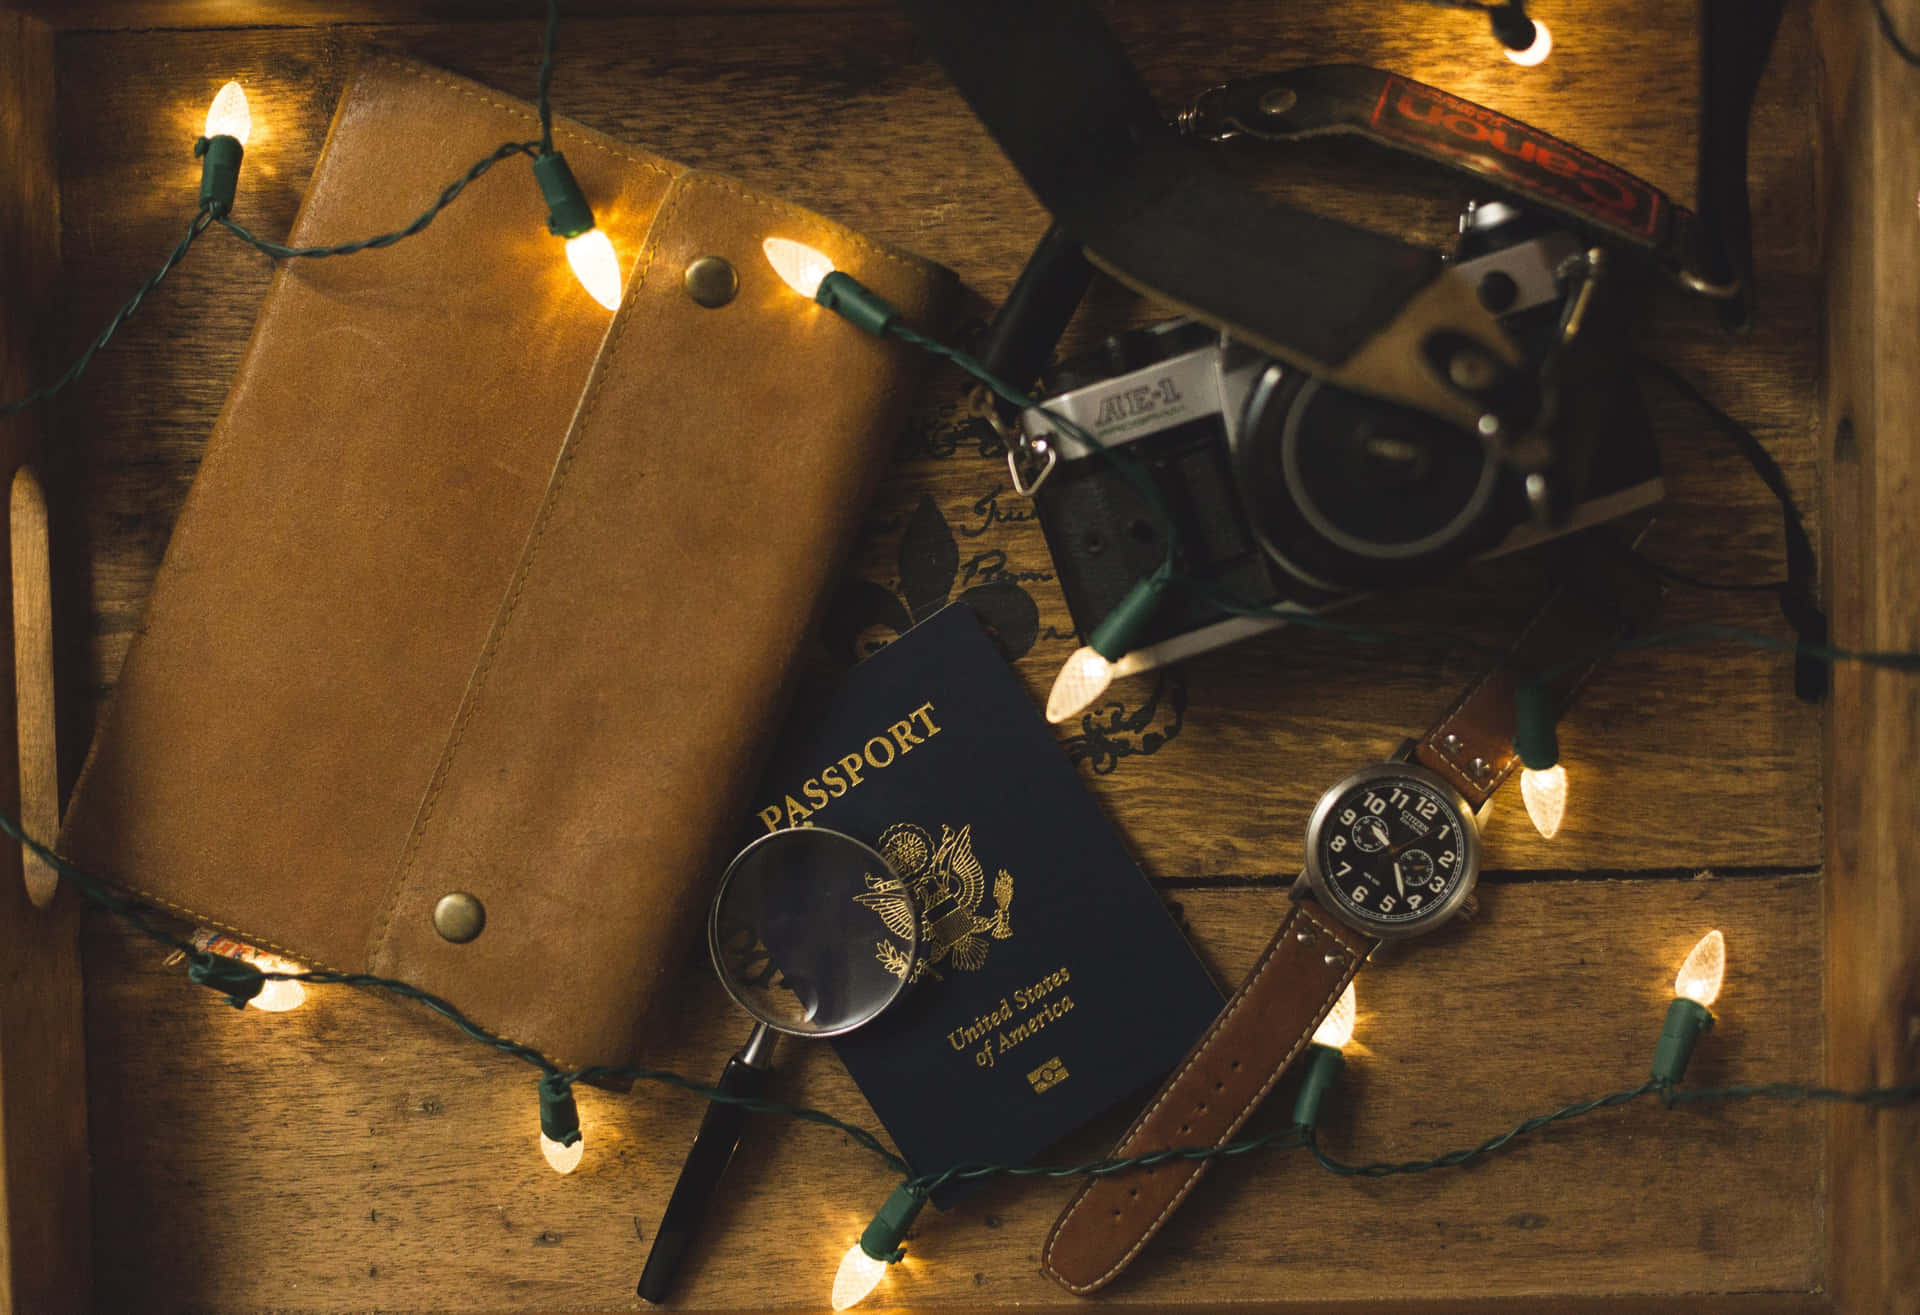 Take your passport with you wherever you go